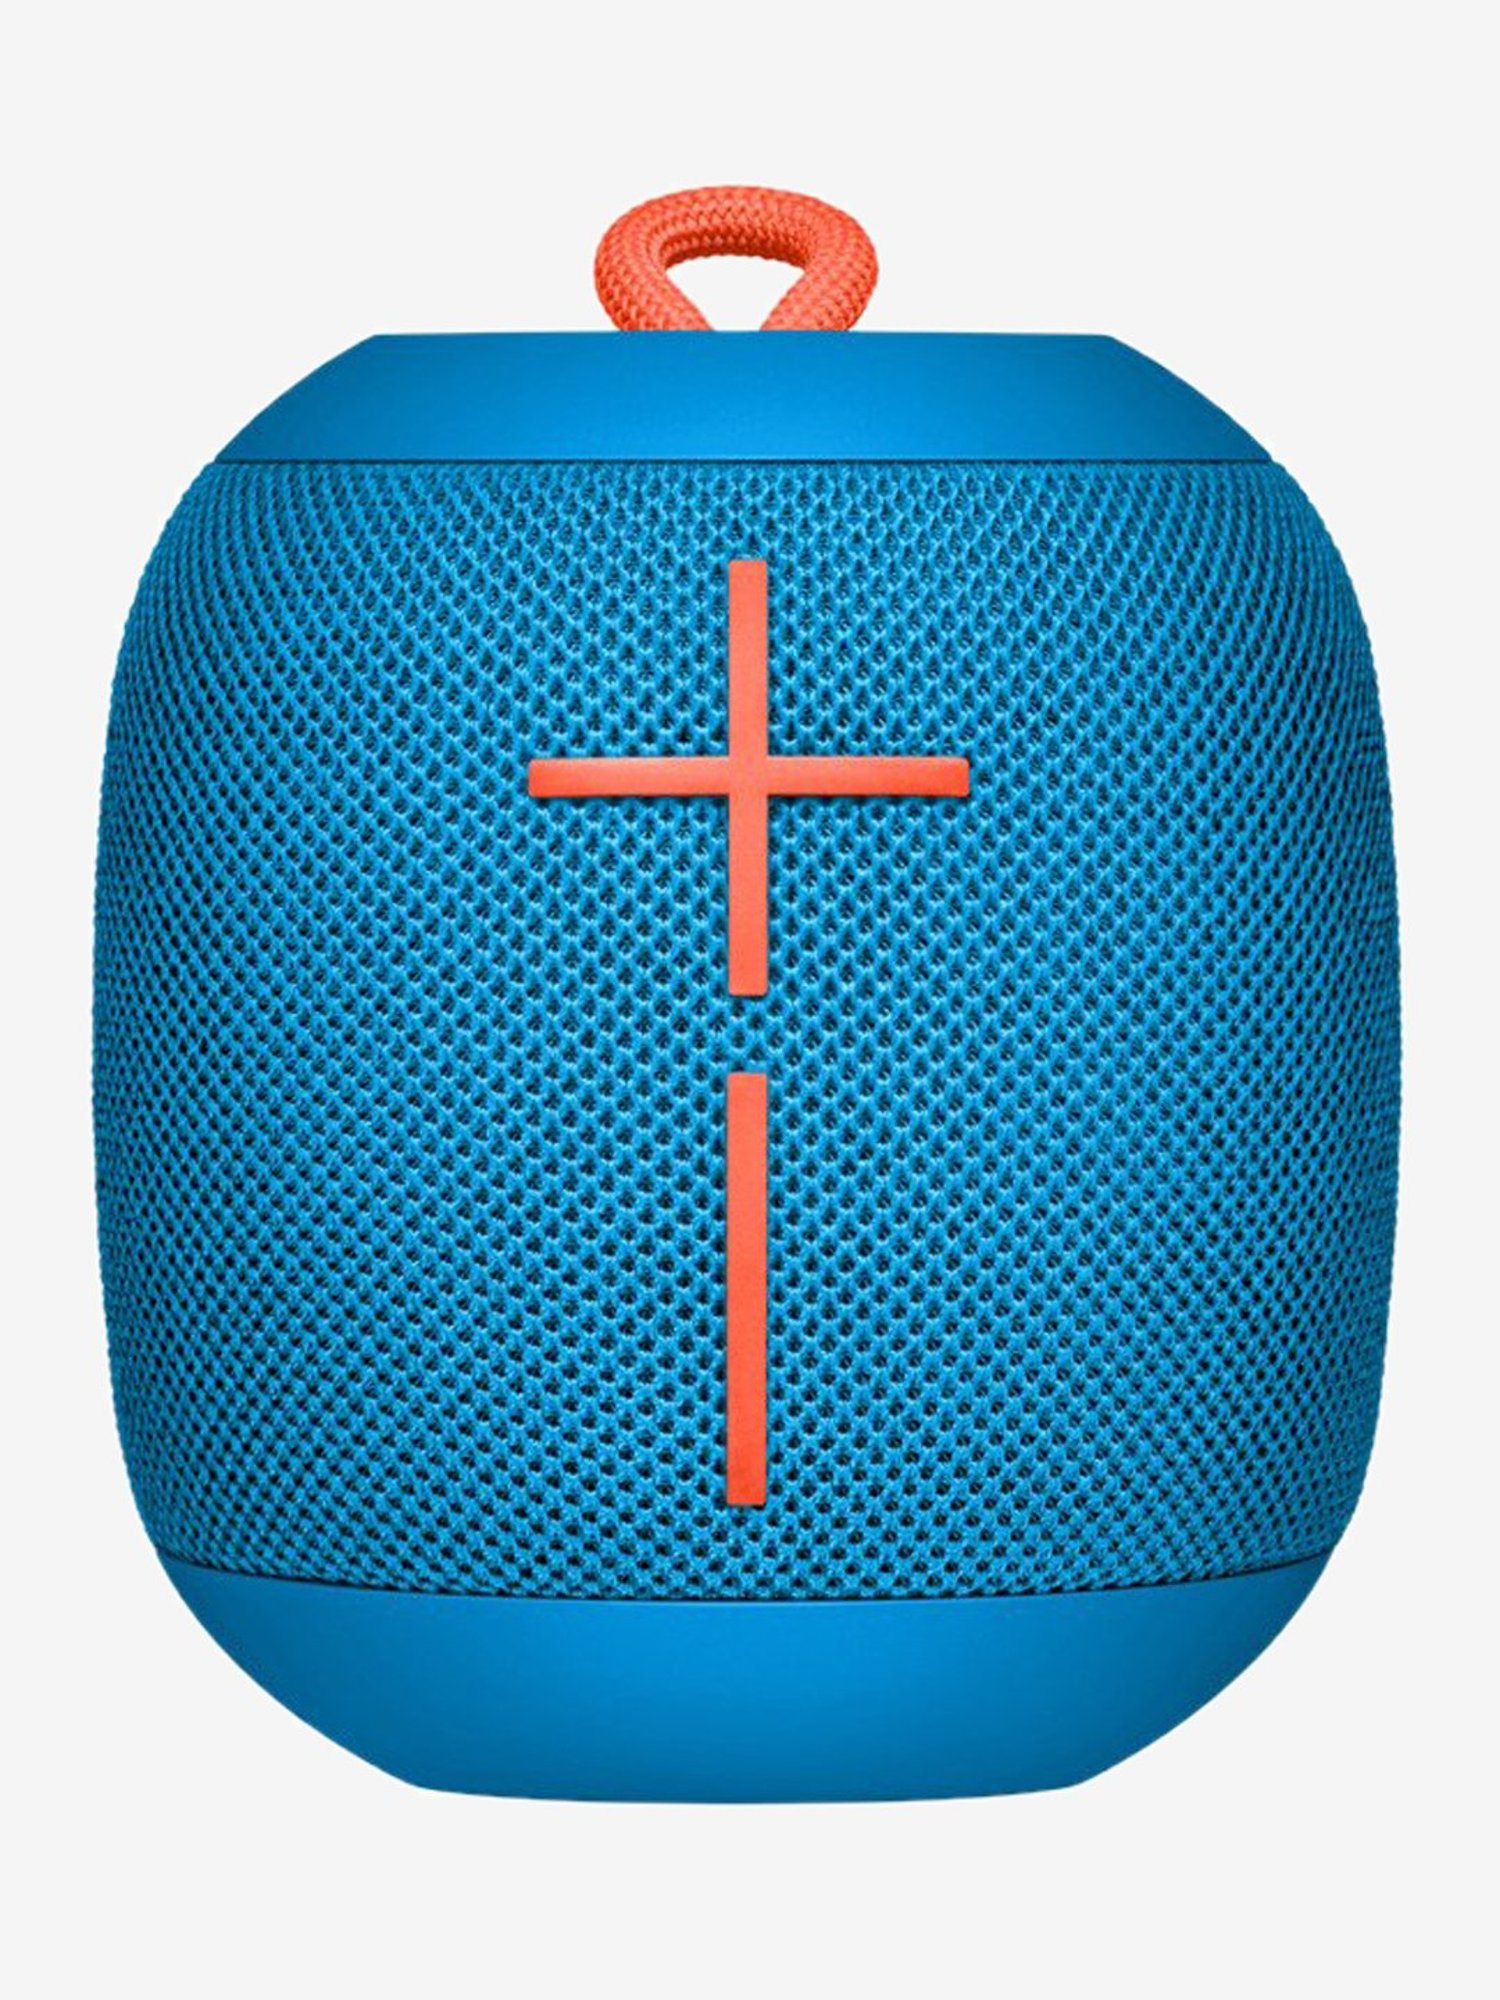 Ultimate Ears WONDERBOOM 3 Bluetooth Speaker with Case, USB Cable